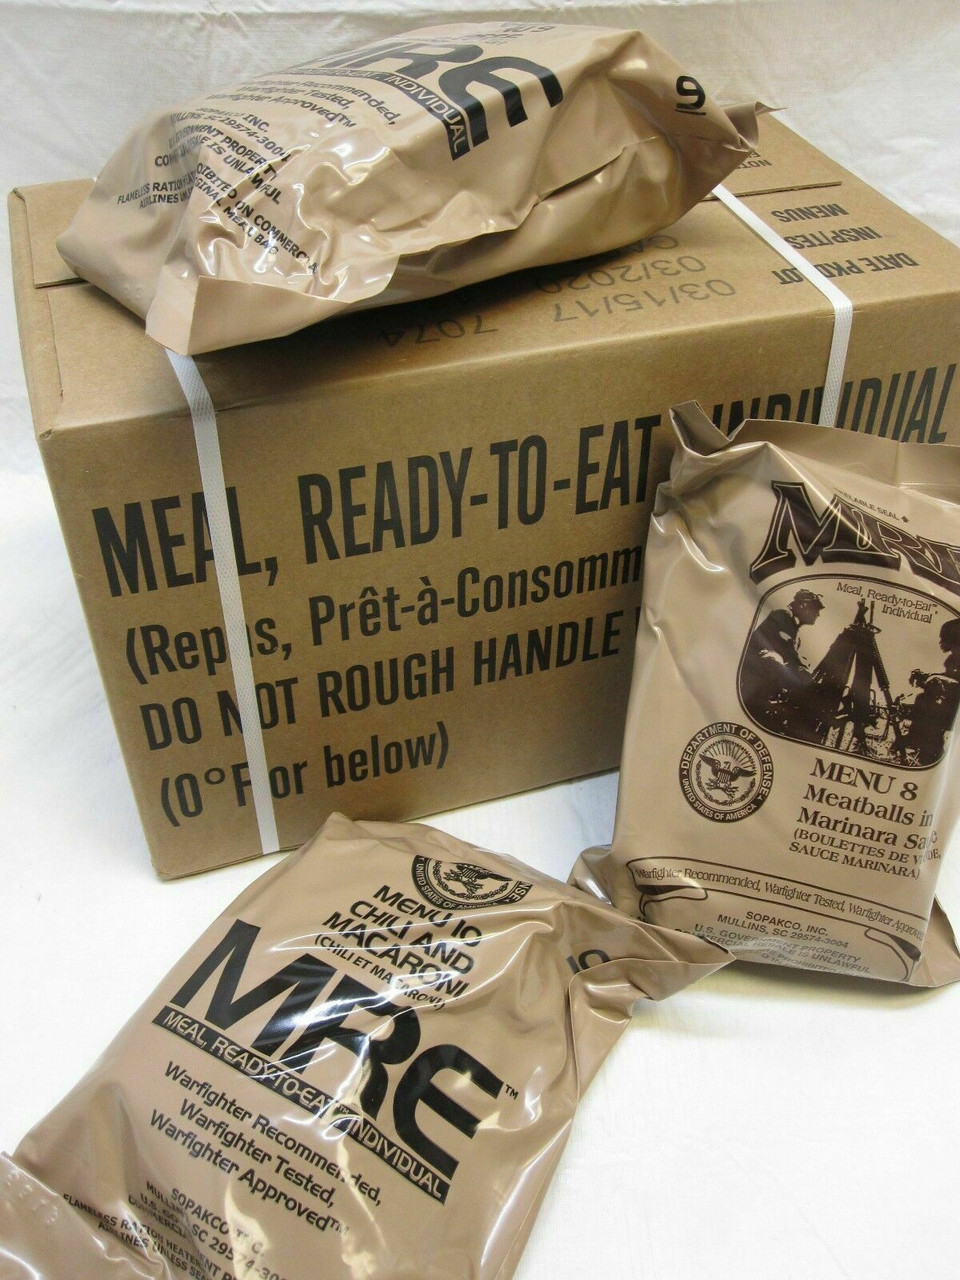 NSFW military facts - The food boxes that come in literally say "For prison and military use only." u/BlackLotus8888